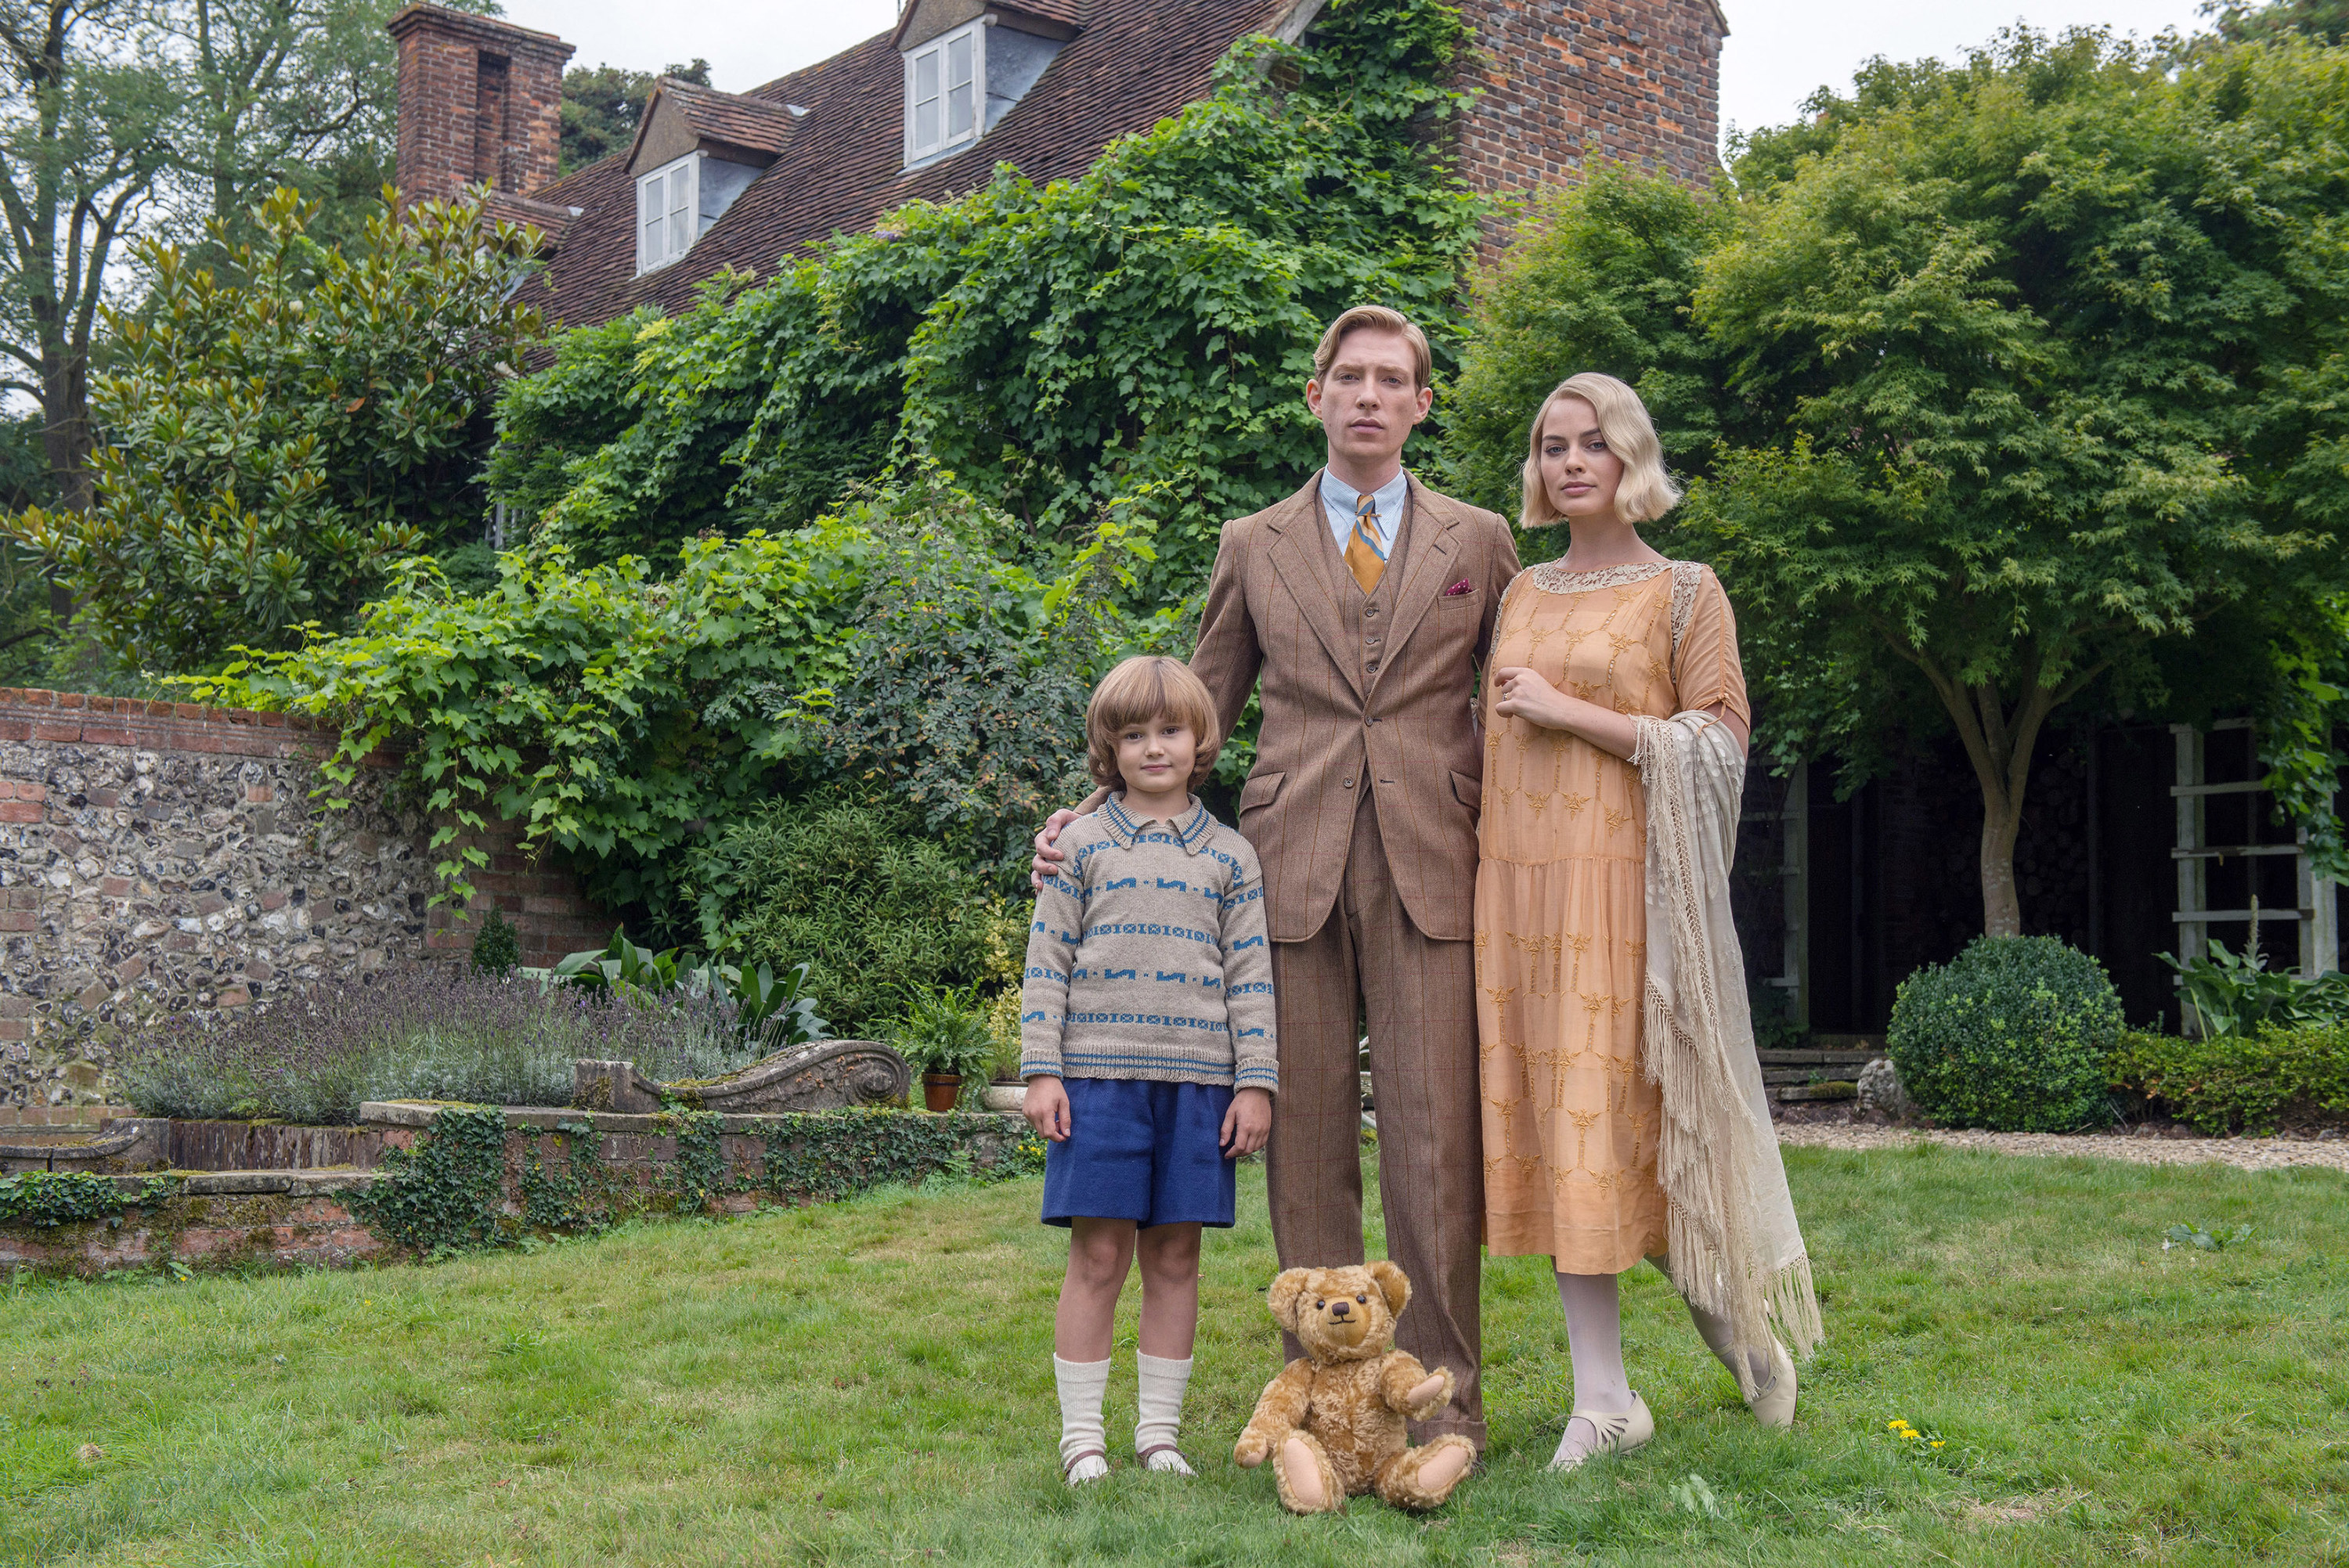 Will Tilston, Domnhall Gleeson, and Margot Robbie stand in front of a house